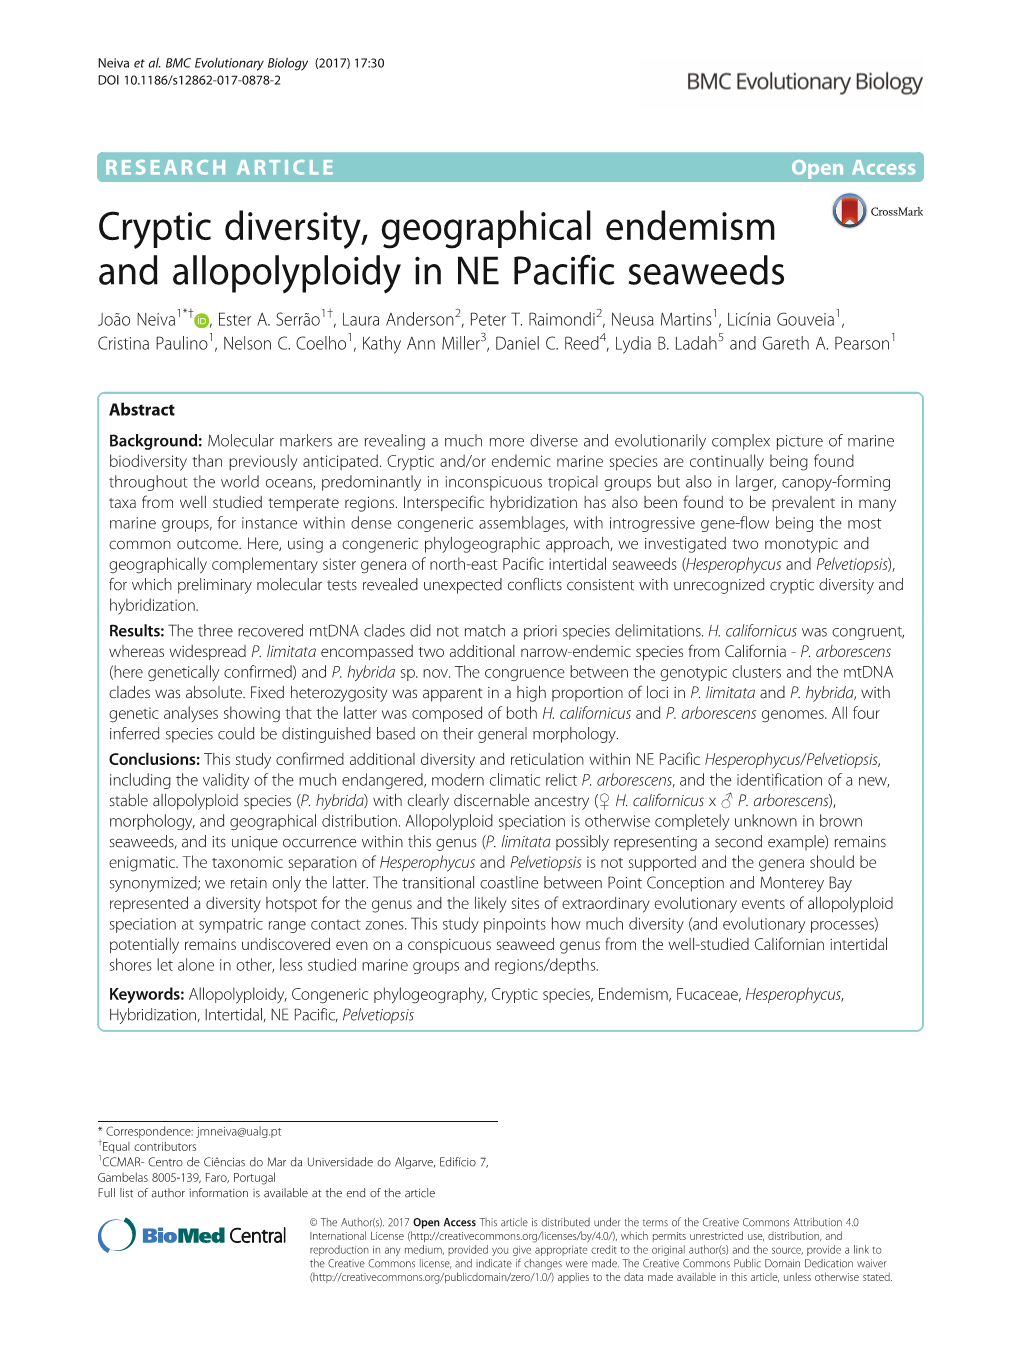 Cryptic Diversity, Geographical Endemism and Allopolyploidy in NE Pacific Seaweeds João Neiva1*† , Ester A